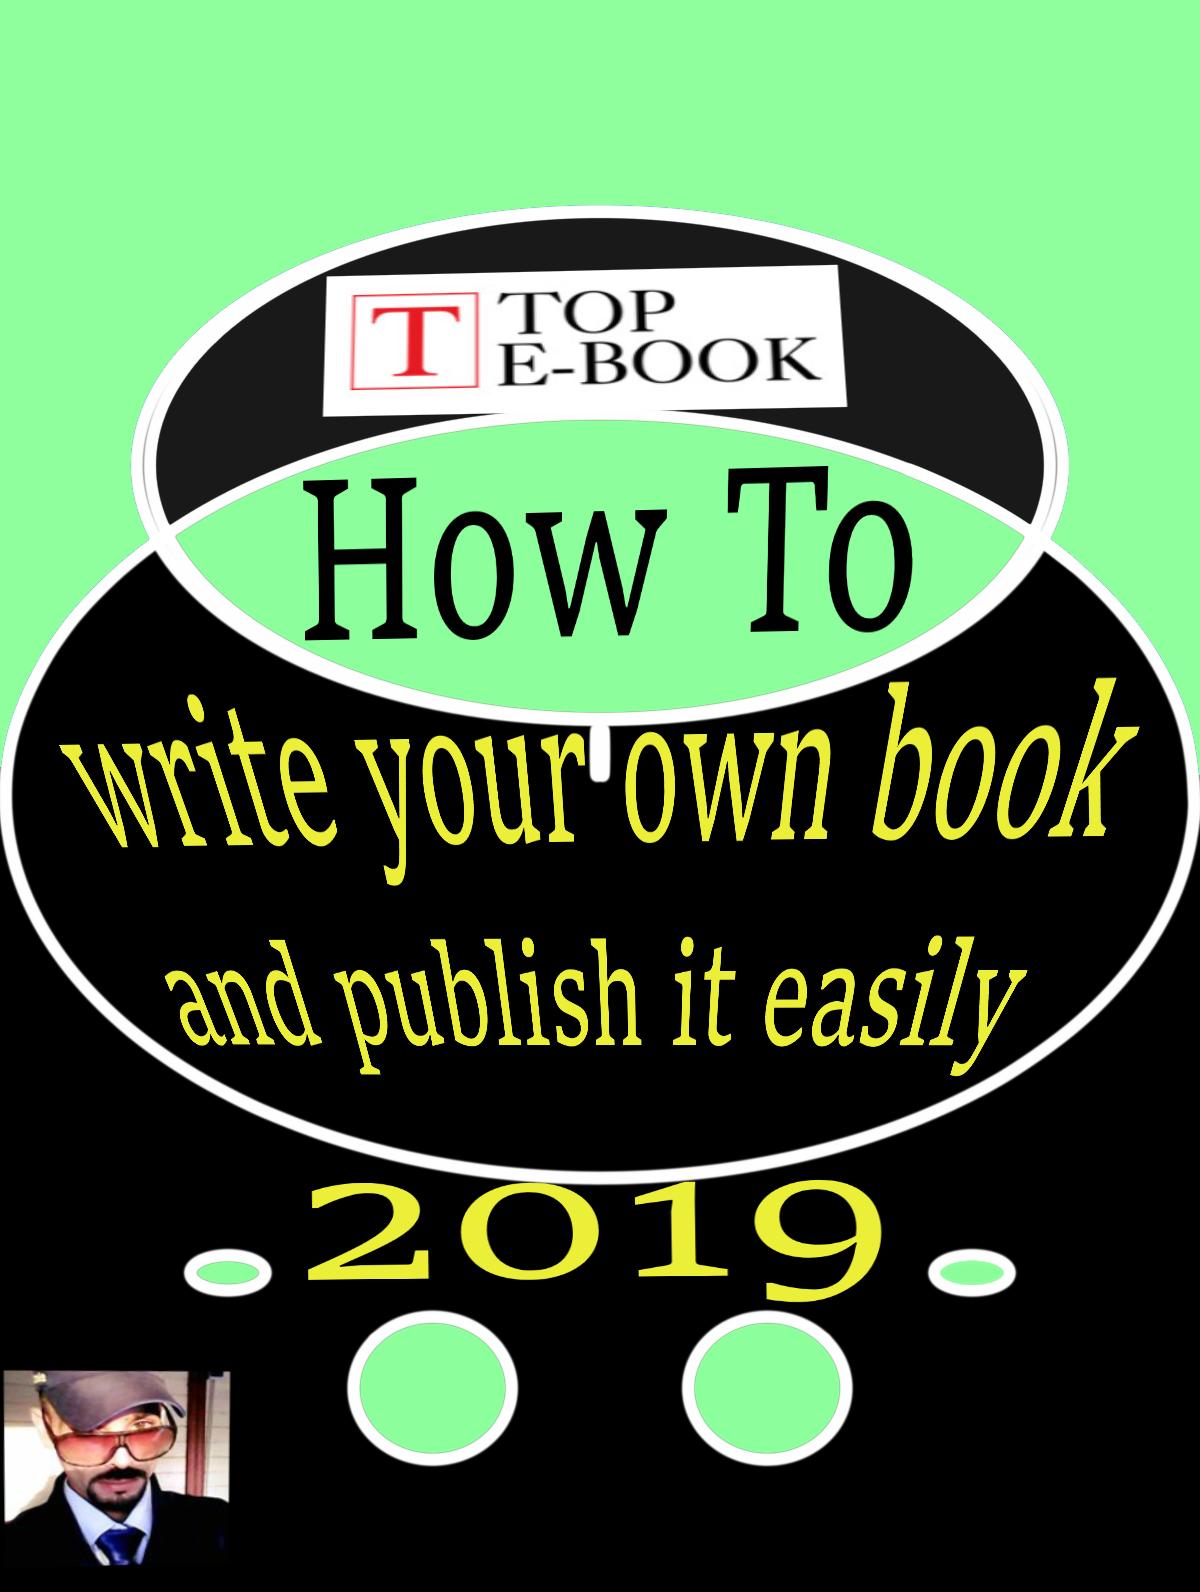 How to write and publish your own book it easily !